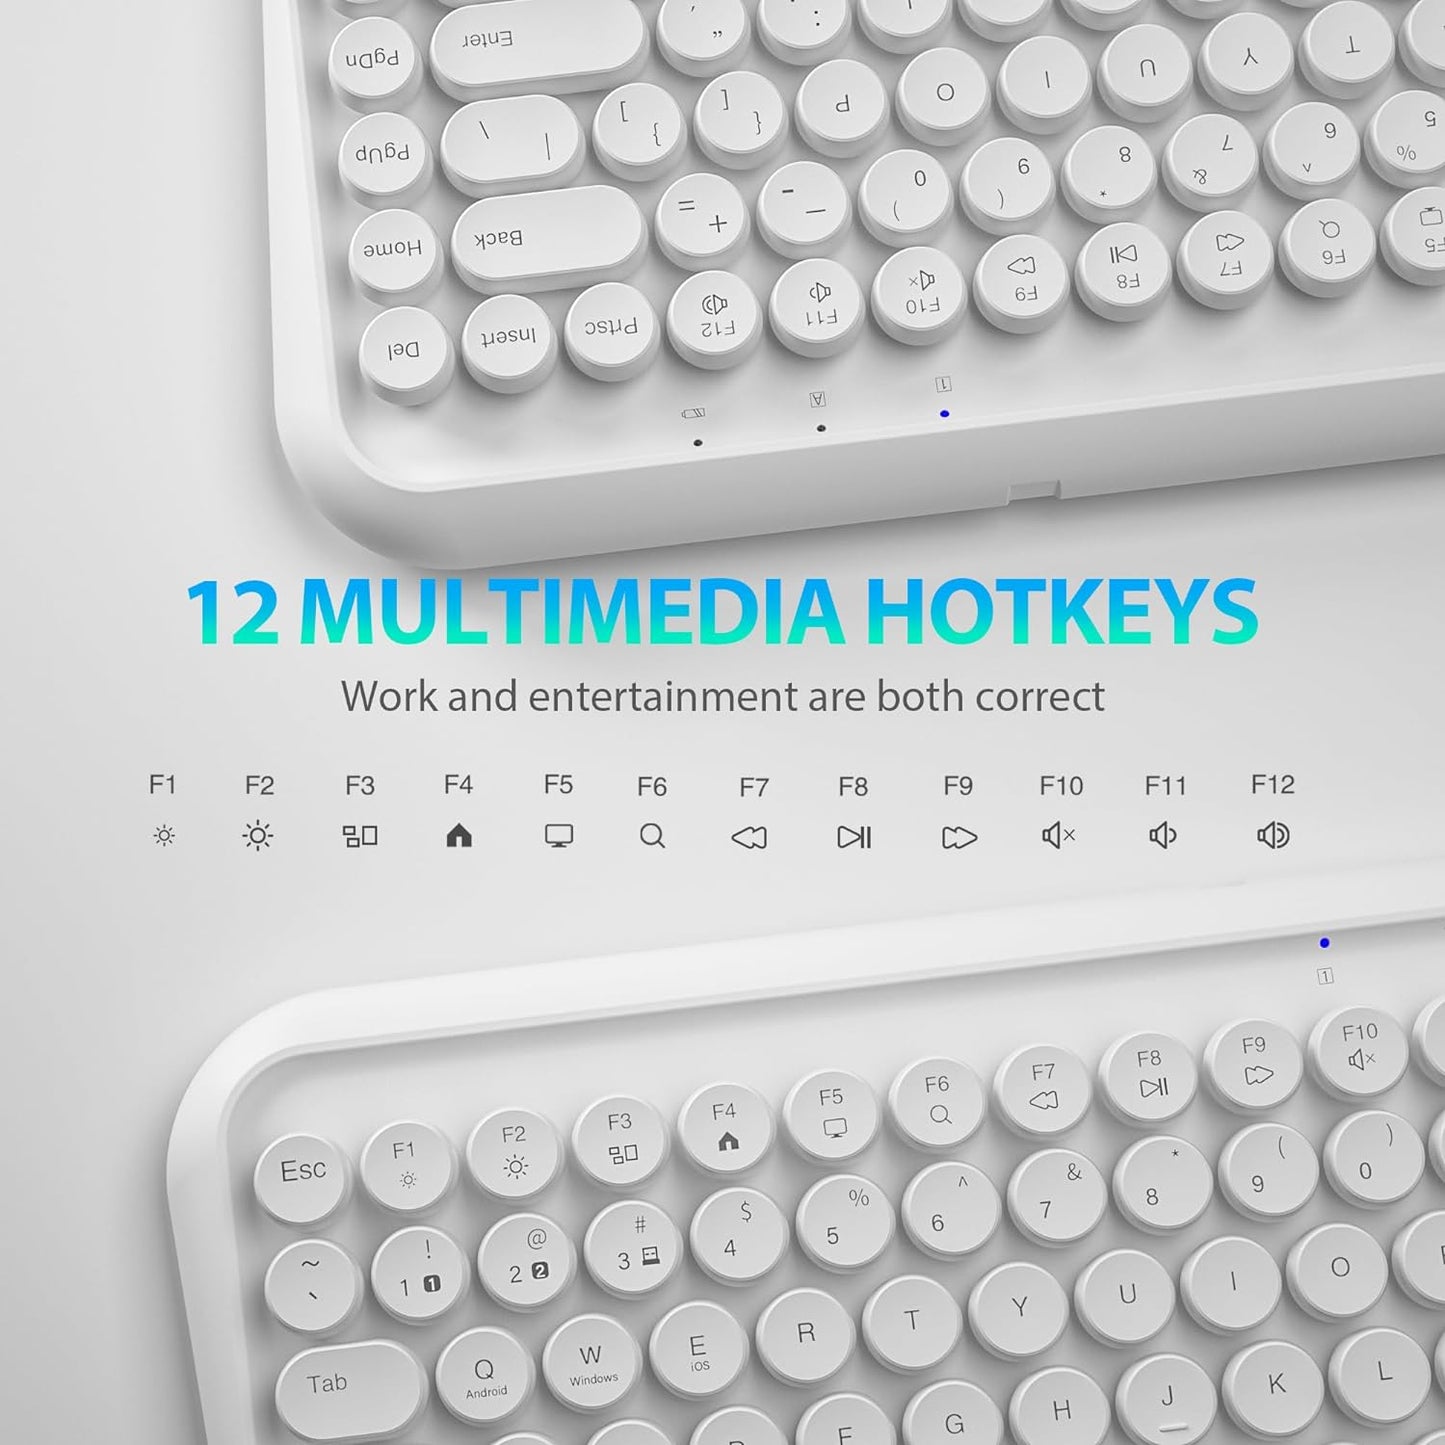 Wireless Bluetooth Keyboard, 2.4GHz Typewriter Retro Keyboard, 84 Keys Portable Office Computer Keyboard with 2xAA Batteries and Cute Floated Round Keycaps for Windows Android PC Laptop Mac iPad,White